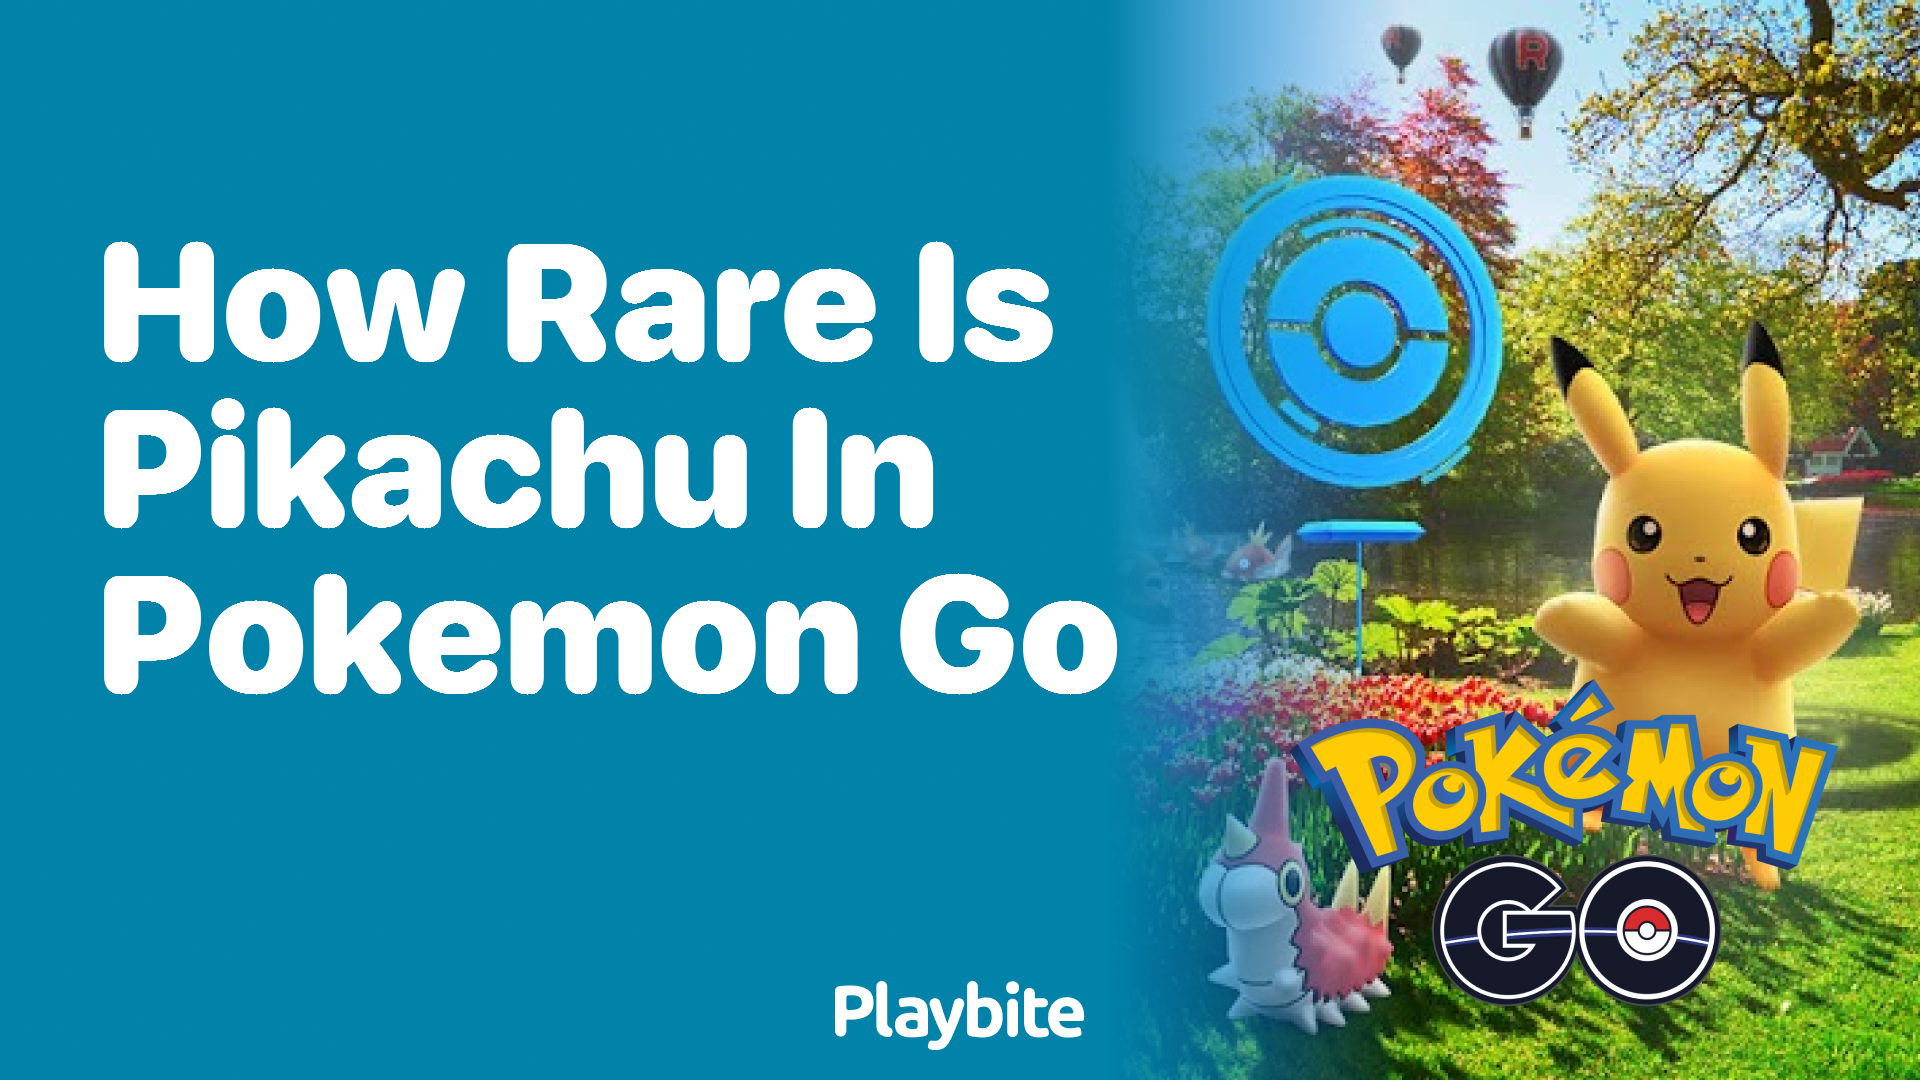 How Rare Is Pikachu in Pokemon GO?